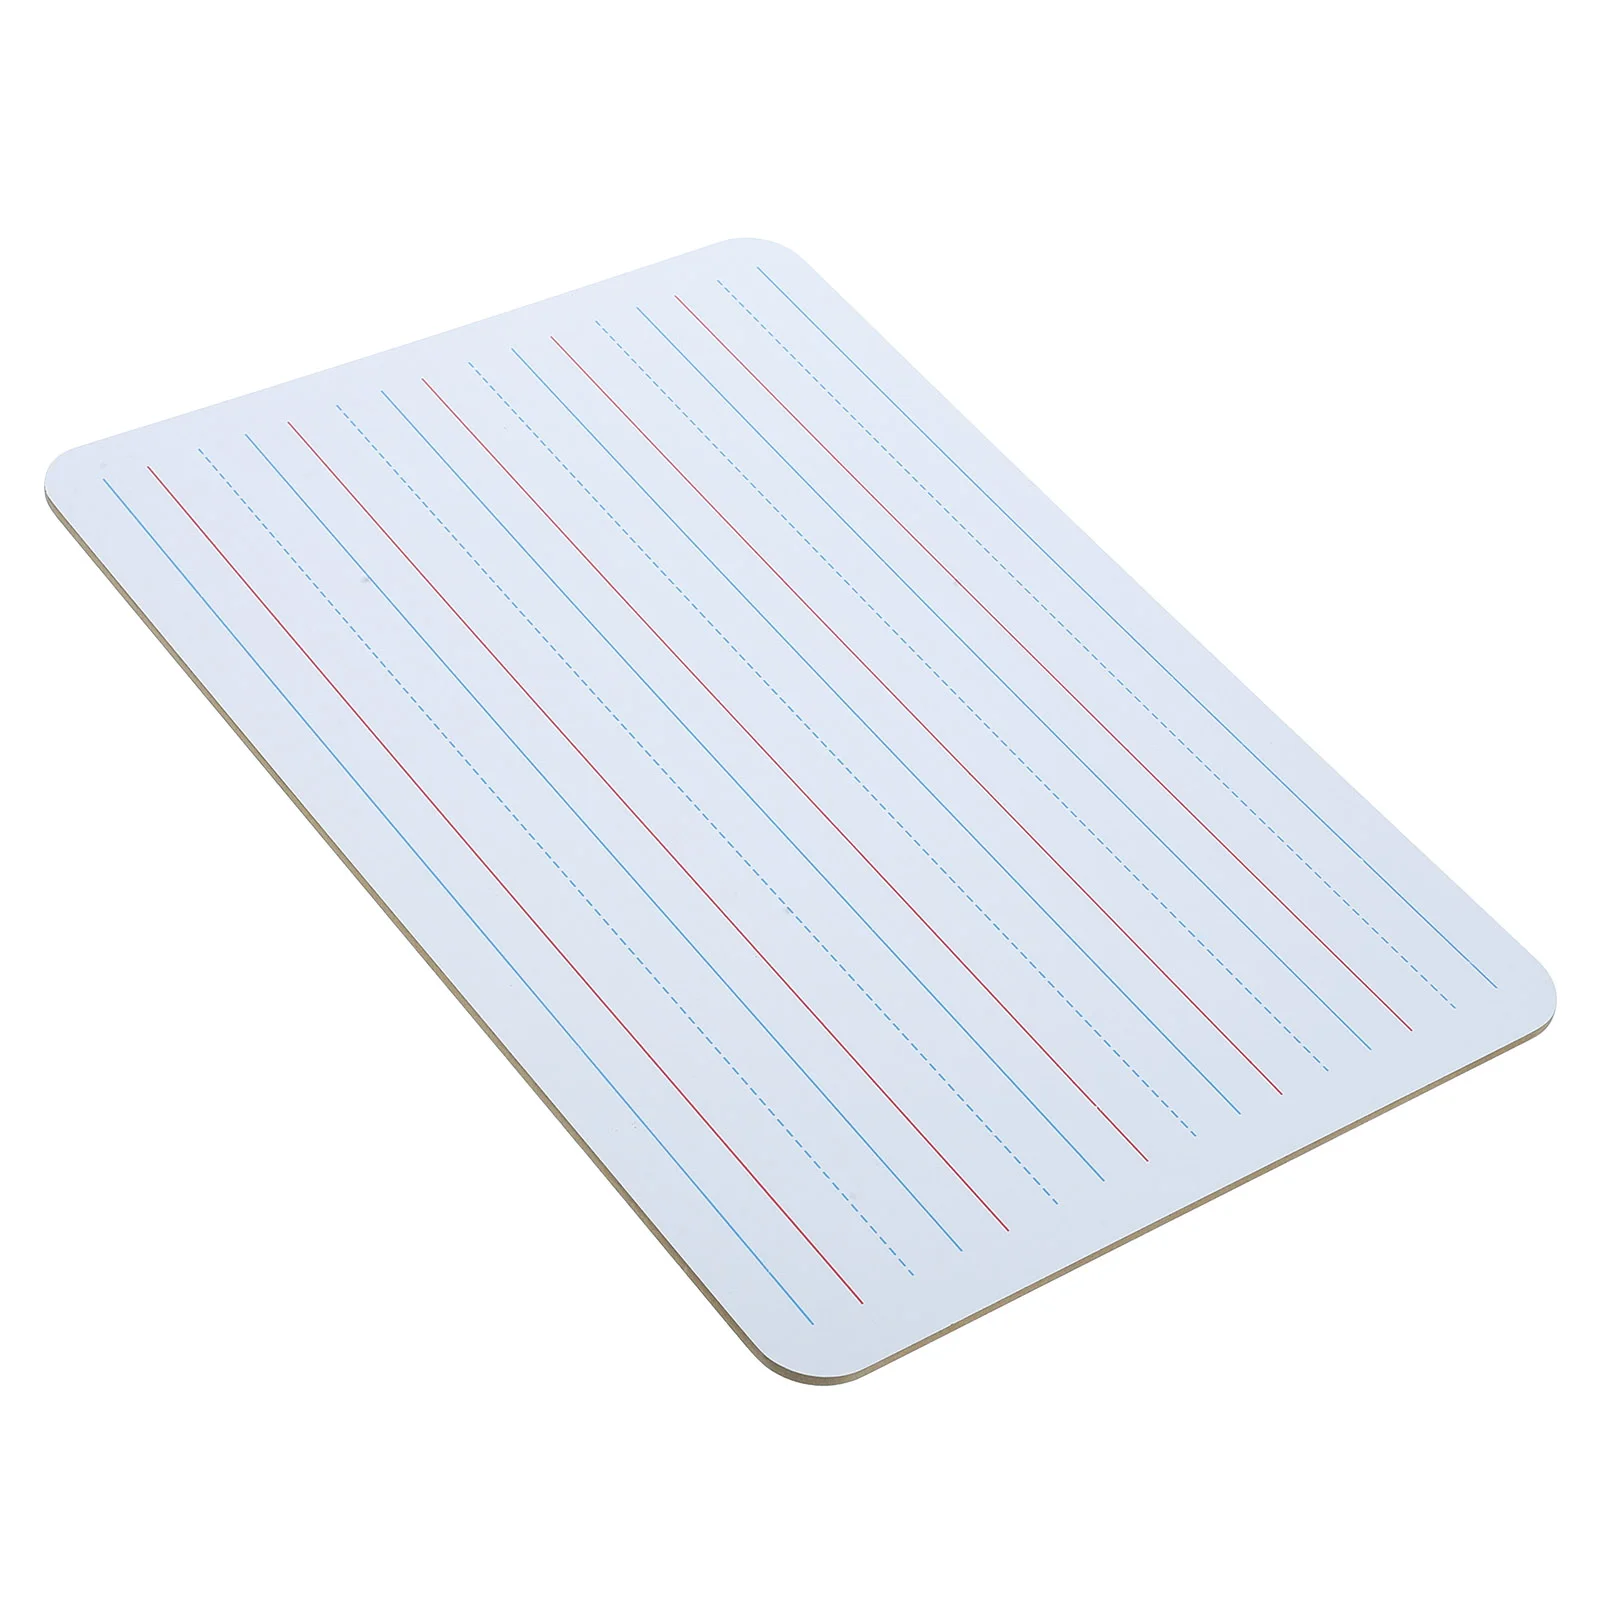 

Sentence Strip Word Cards Dry Erase Board Writing White Whiteboard Classroom Boards Strips for Teachers with Lines Small